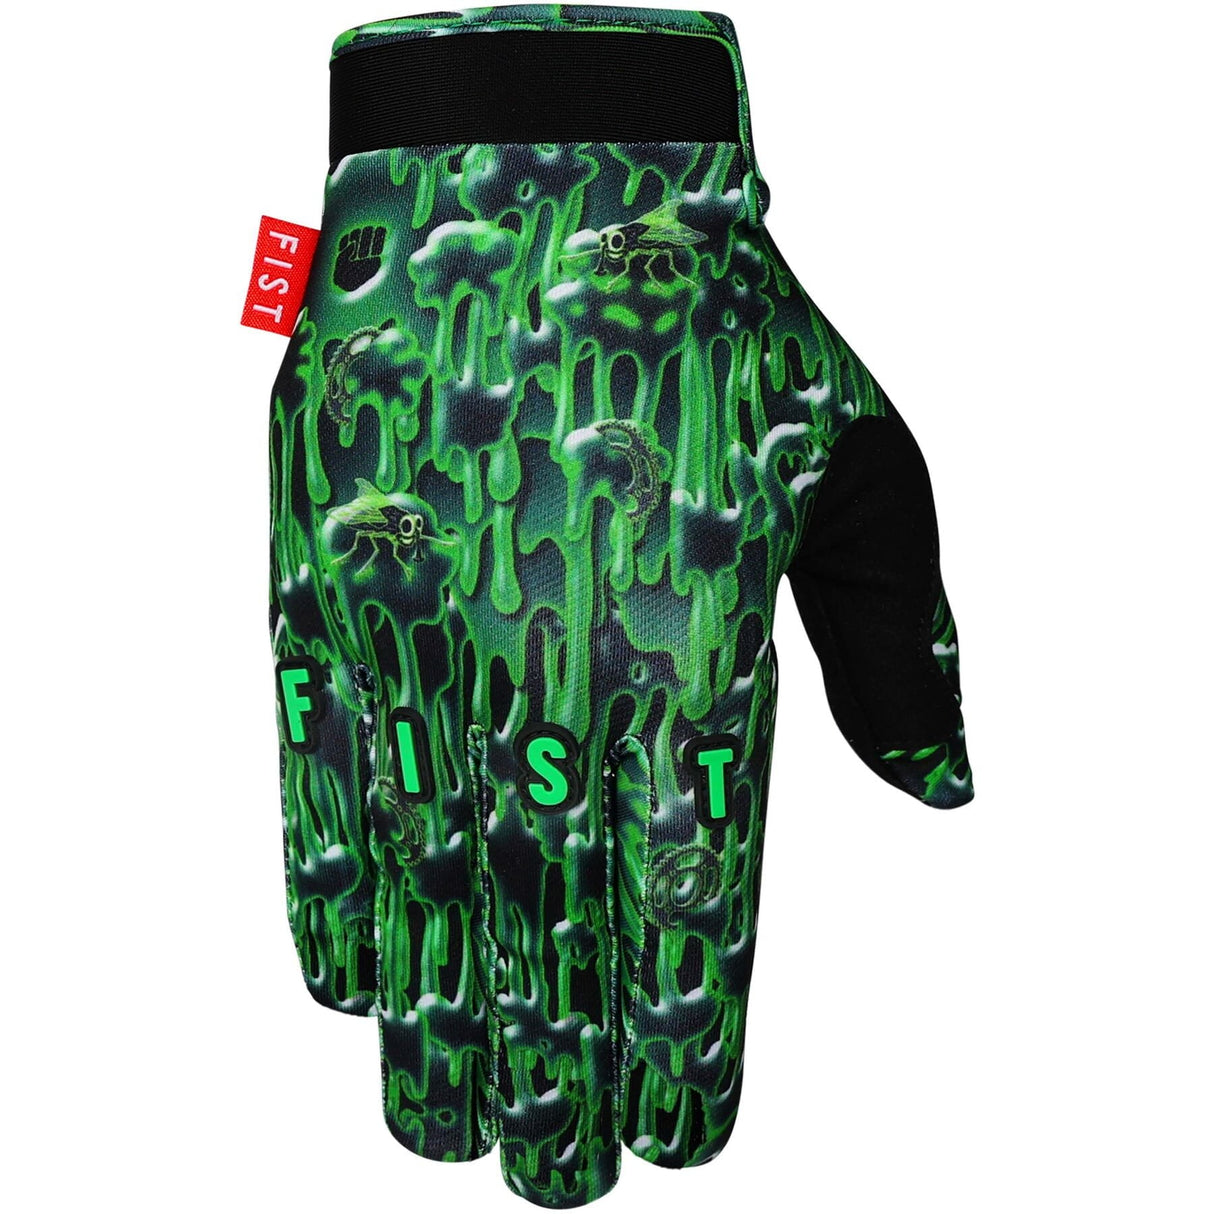 Fist Handwear Chapter 20 Collection - Lynx Lacey Slime Youth